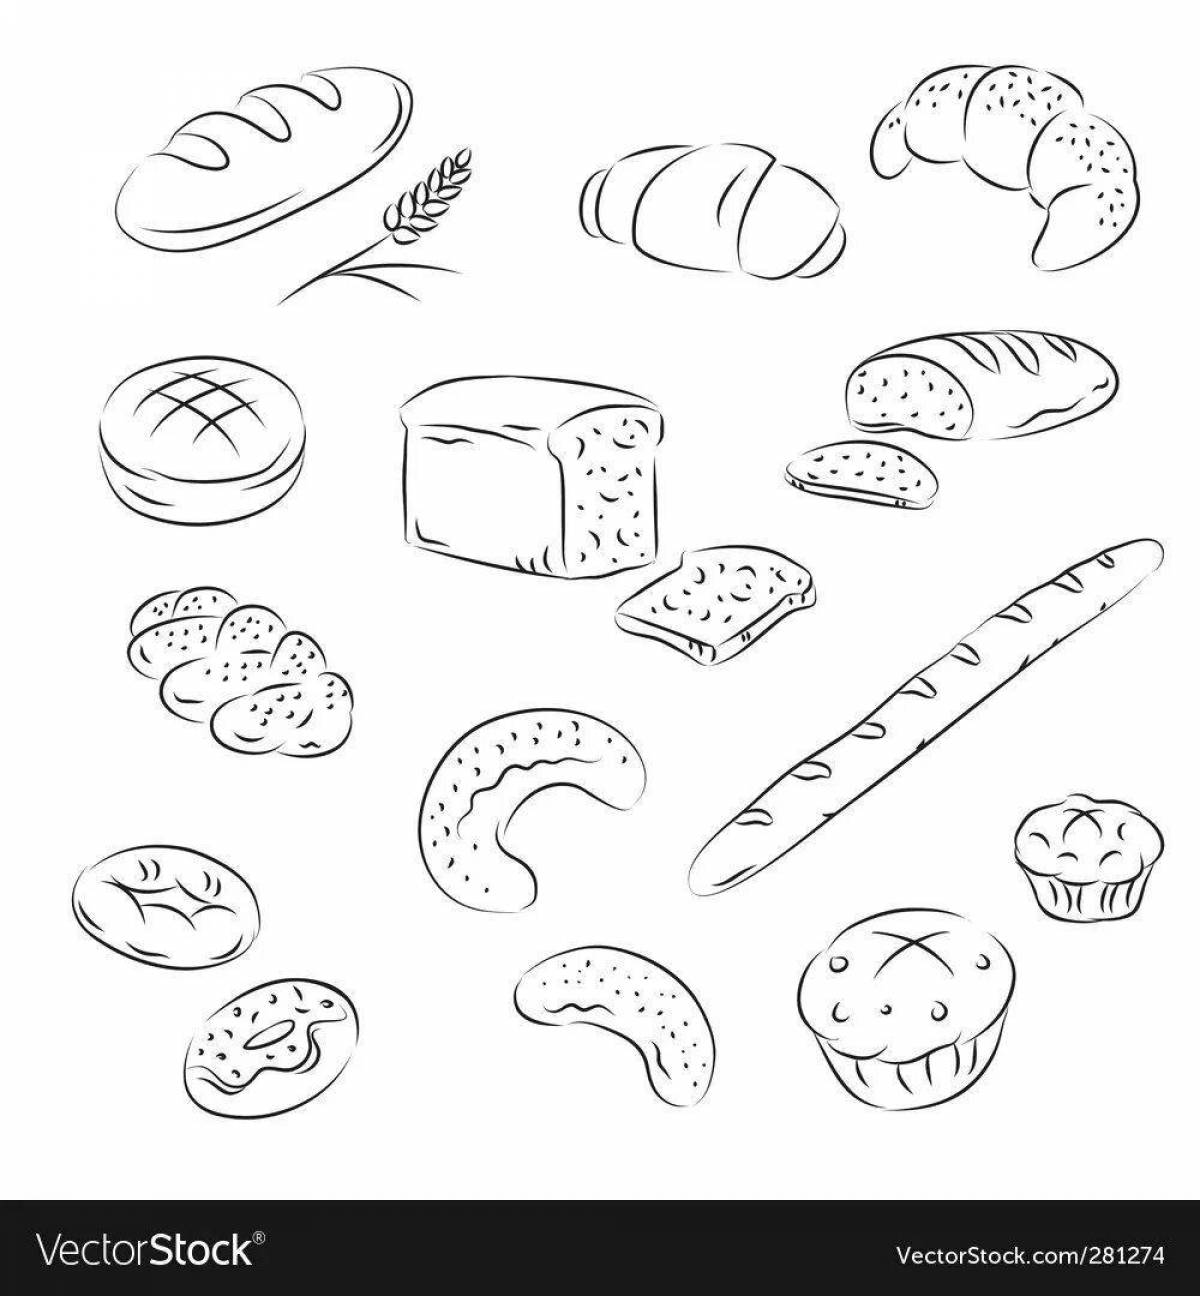 Interesting bakery coloring page for preschoolers